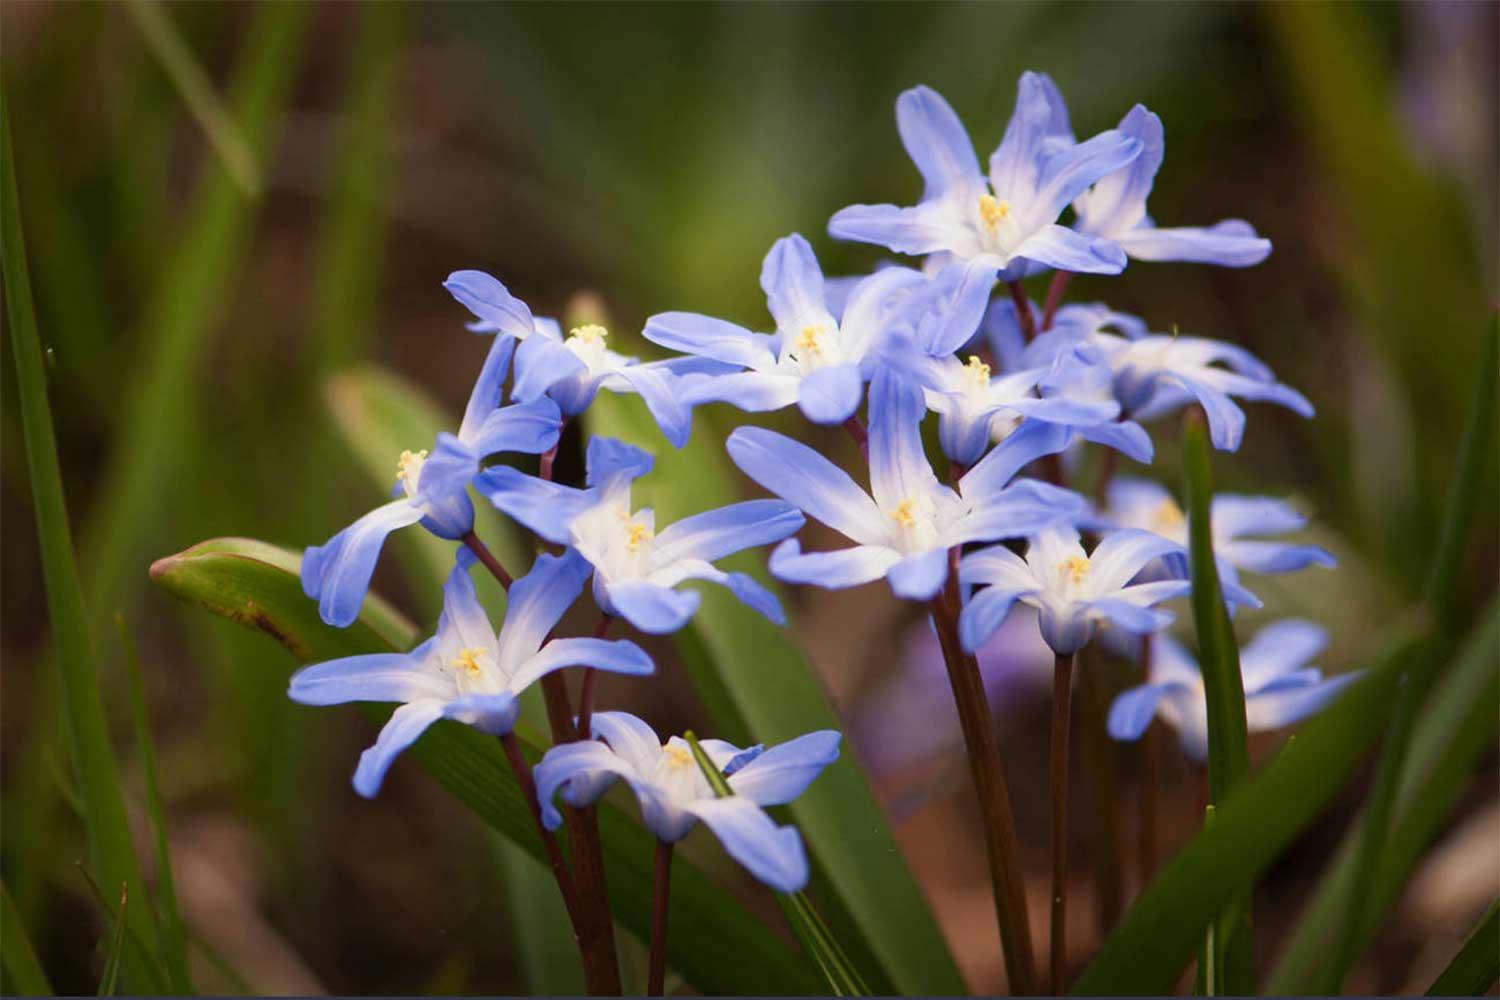 Pale blue, heart-shaped flowers with a white center.